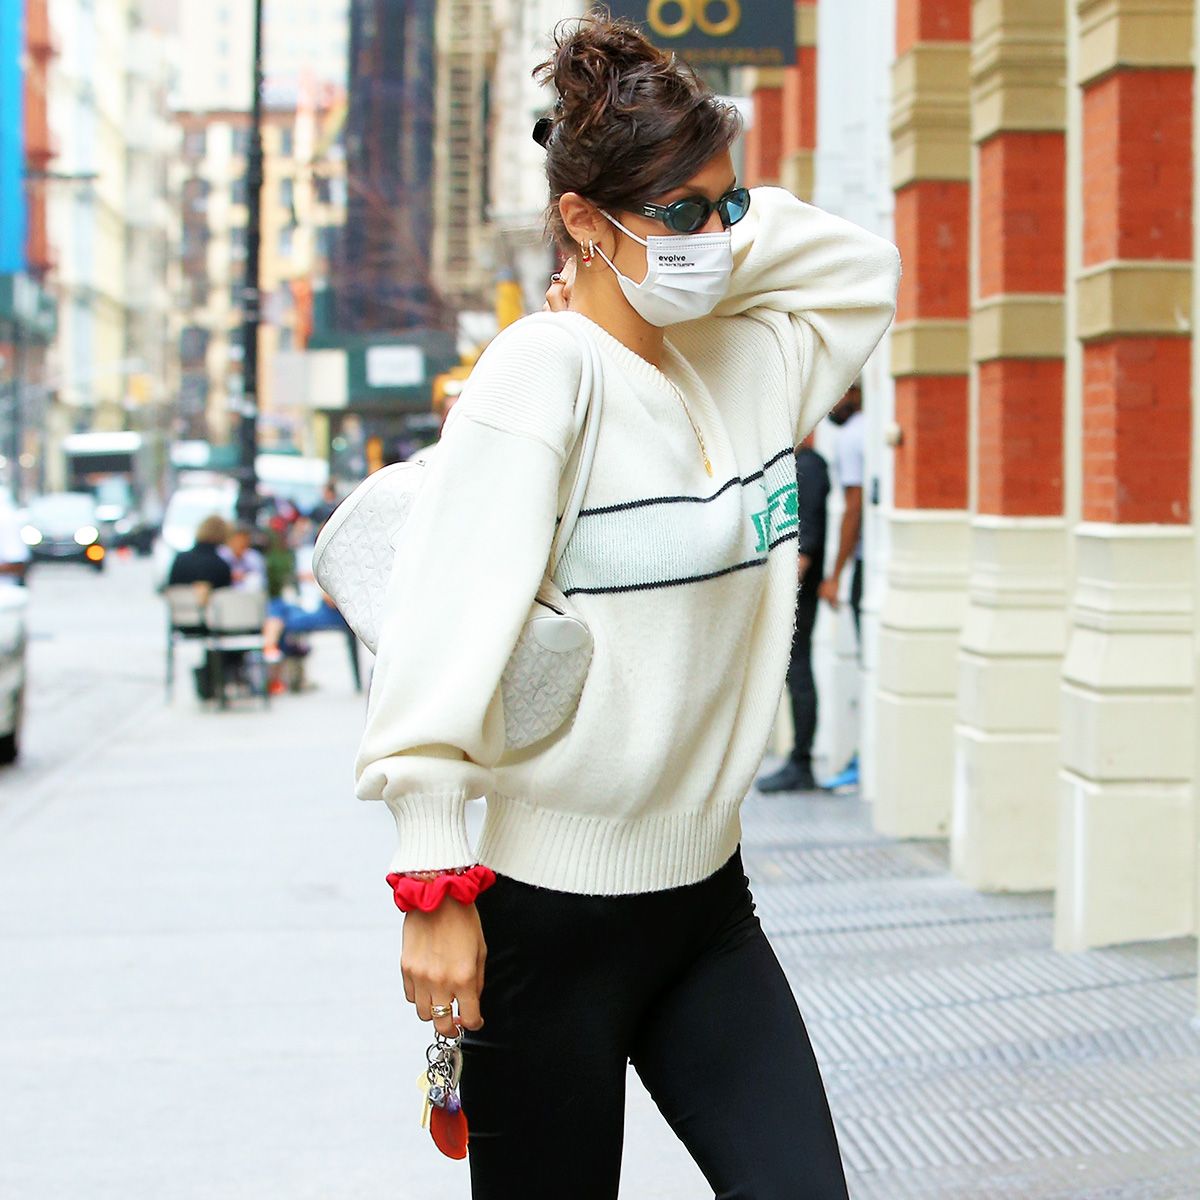 Looking to style athleisure with a fashionable, celeb-approved